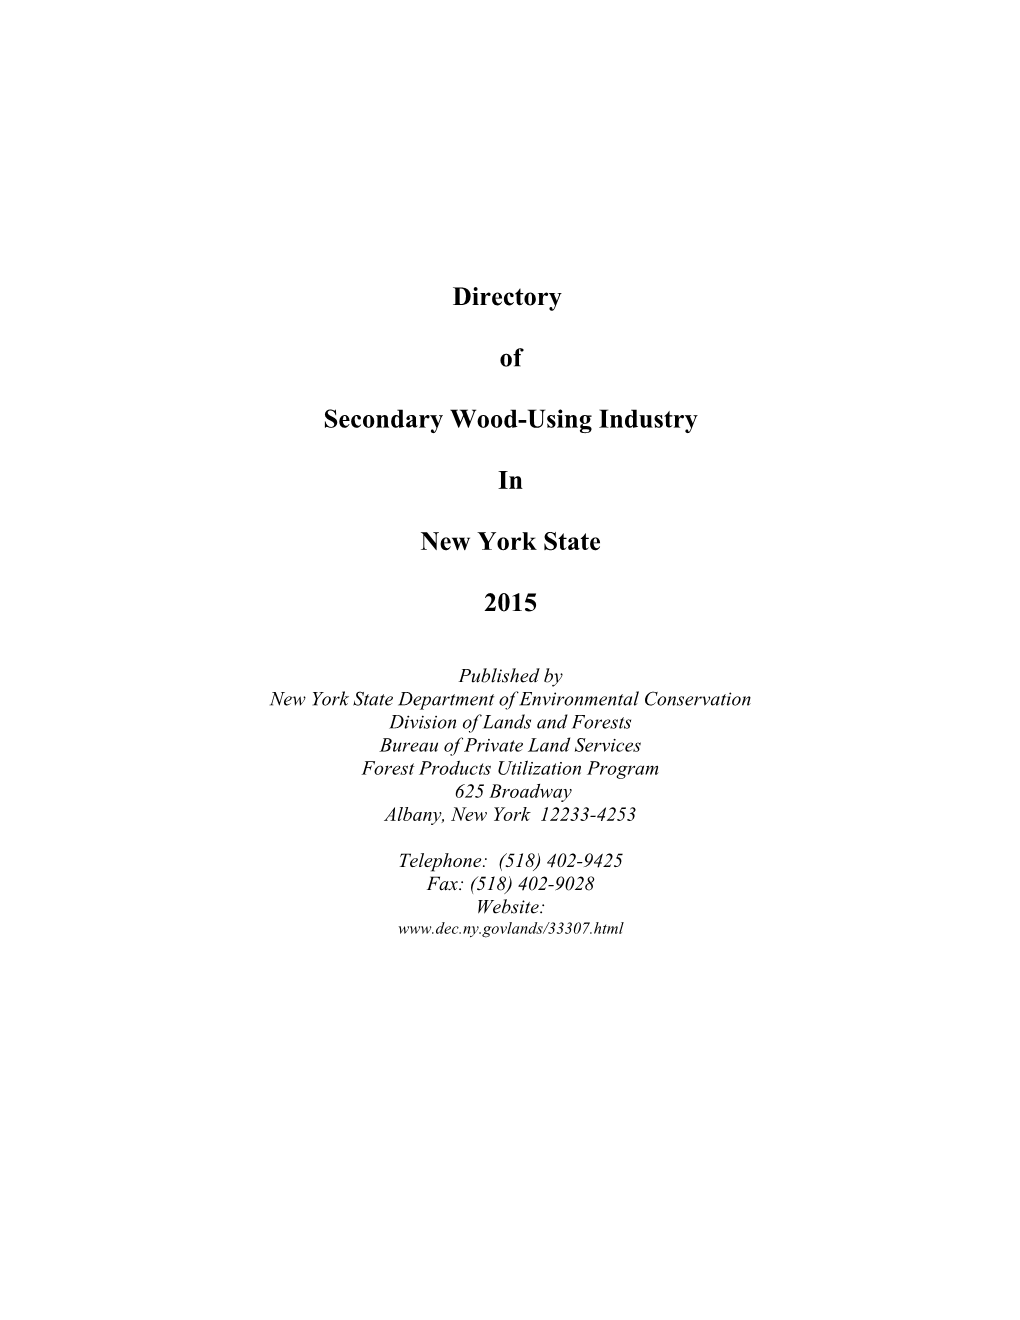 Directory of Secondary Wood-Using Industry in New York State–2015